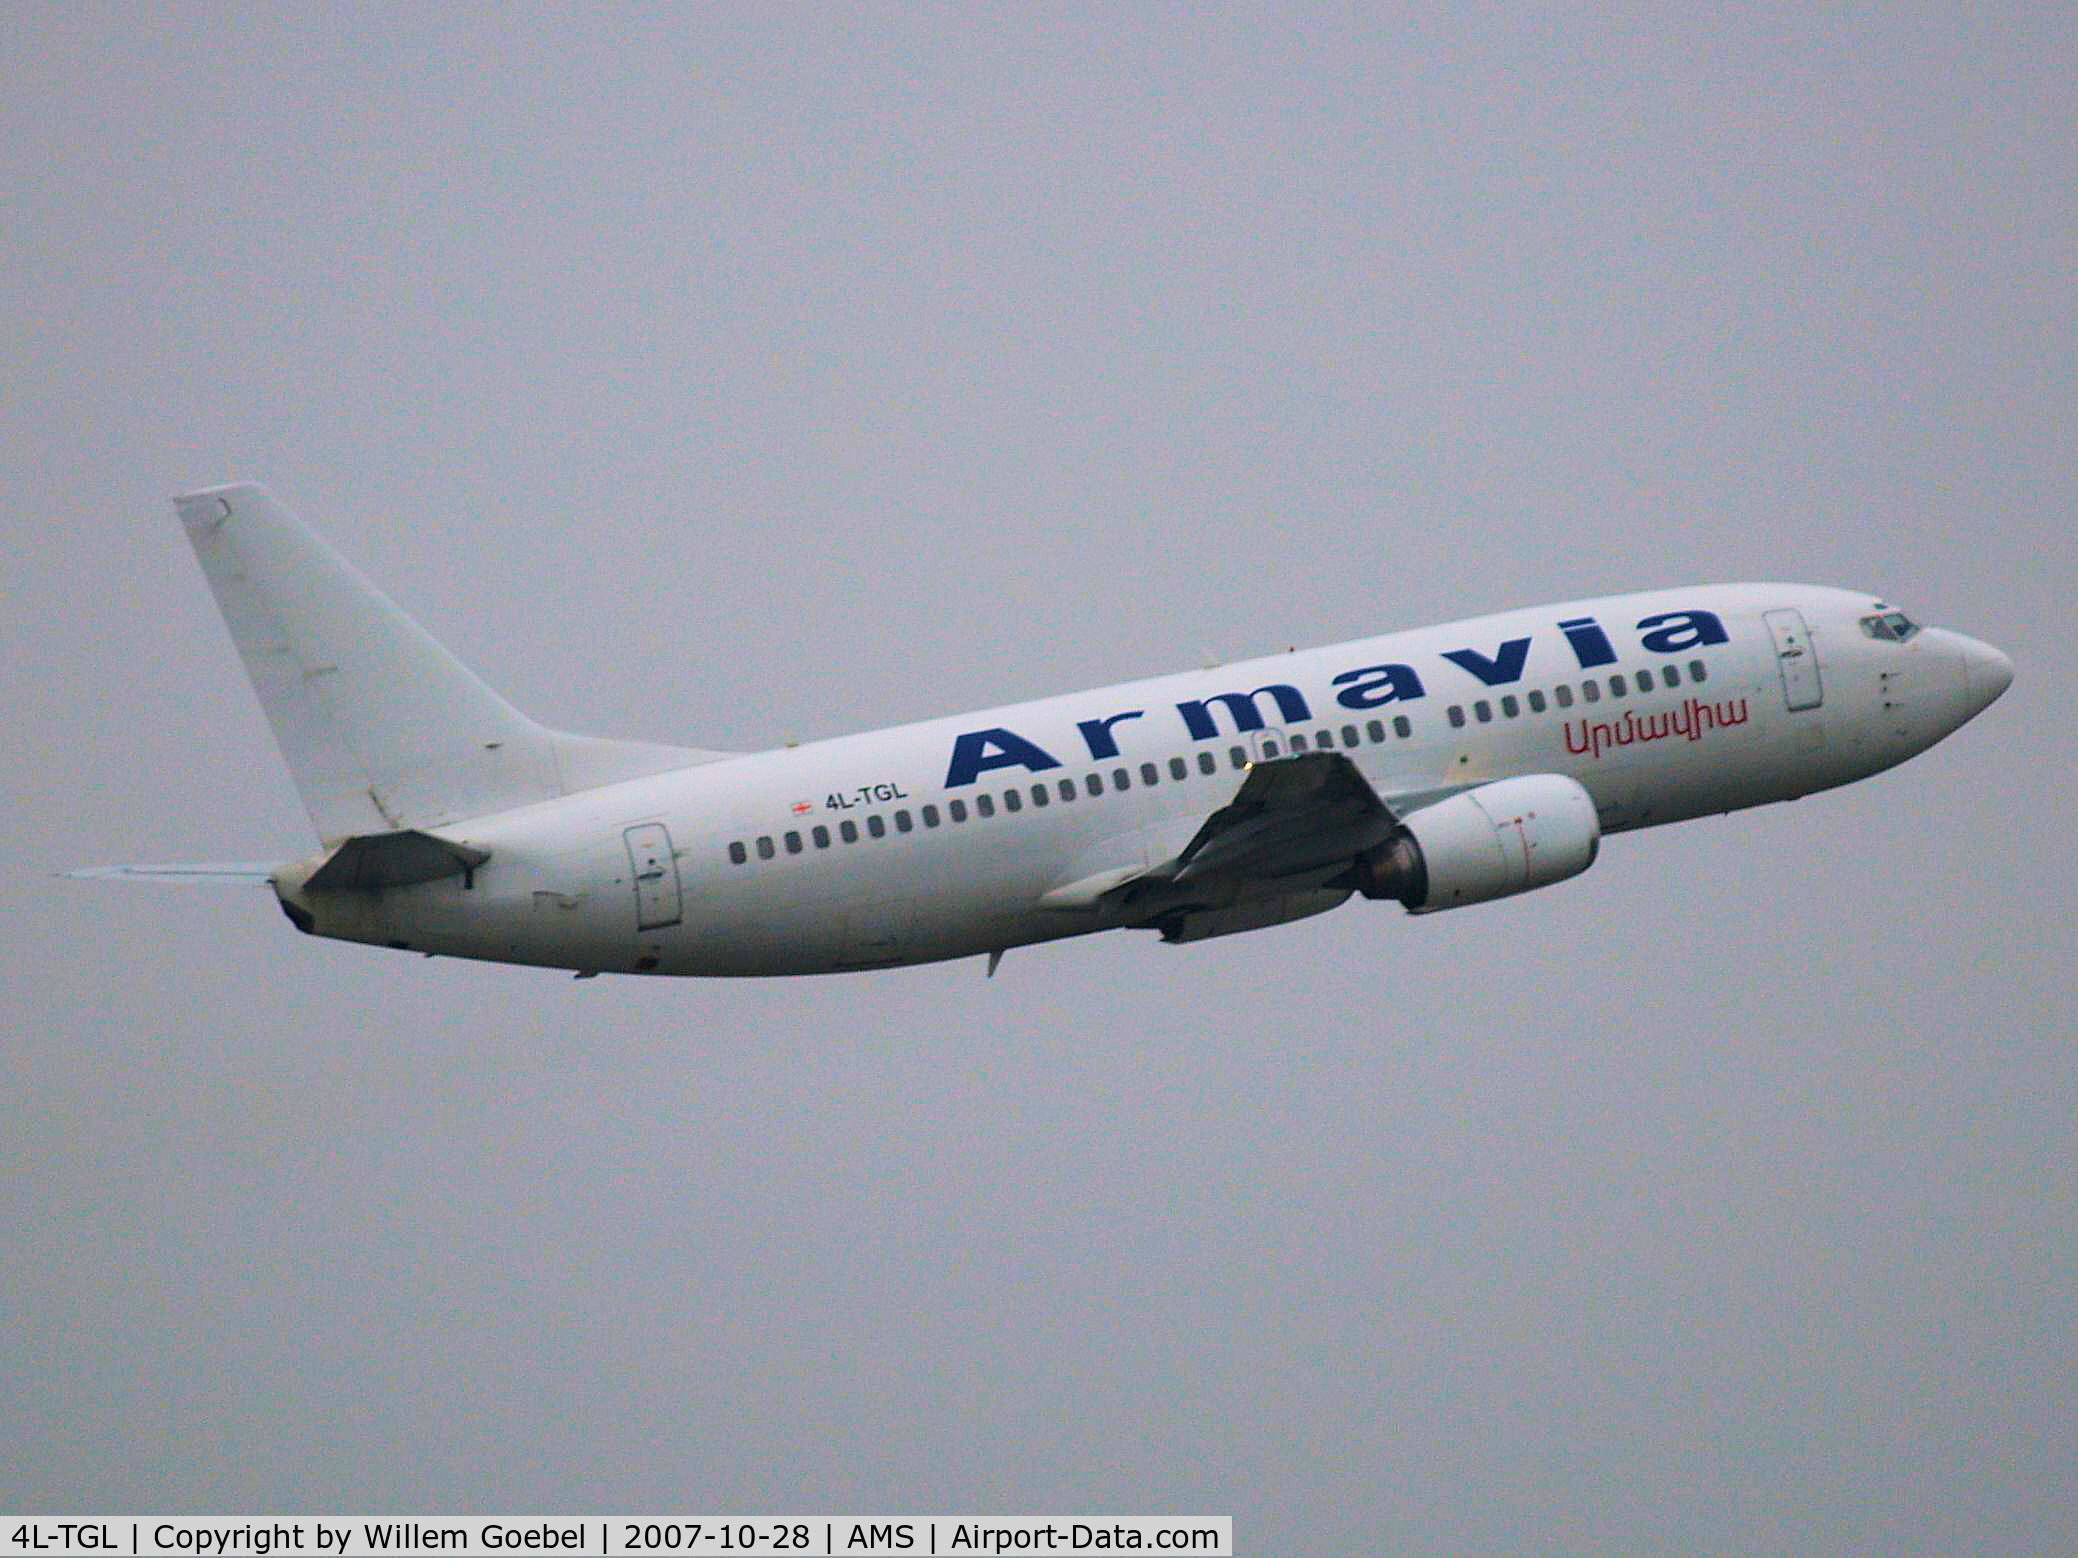 4L-TGL, 1988 Boeing 737-3B7 C/N 23859, Take off from runway L36 of Amsterdam Airport